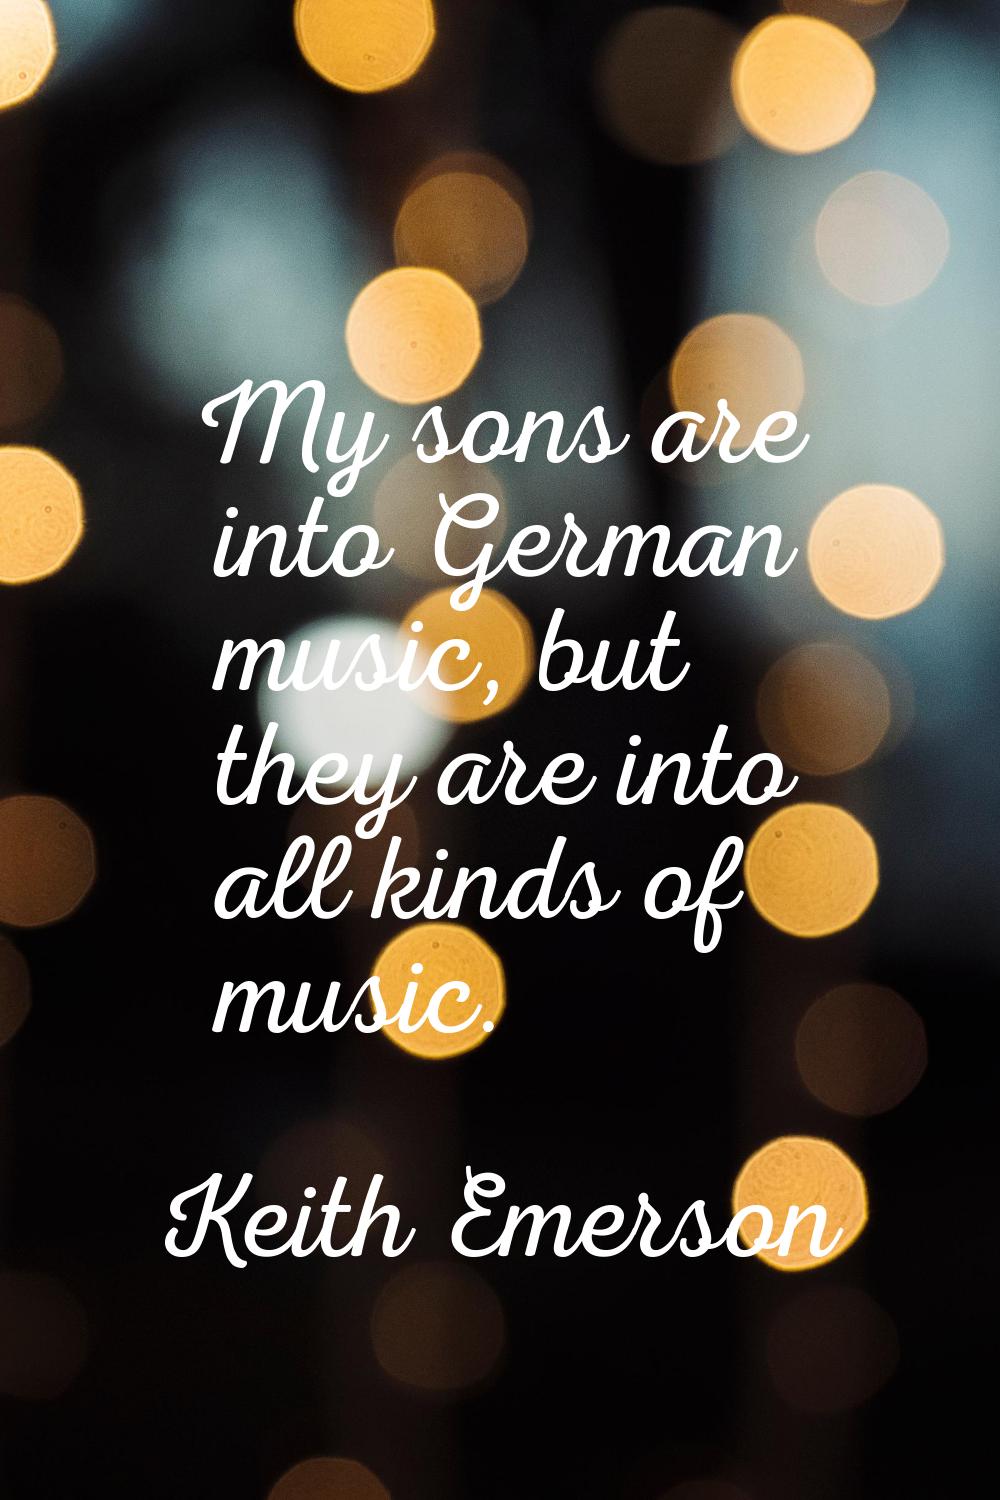 My sons are into German music, but they are into all kinds of music.